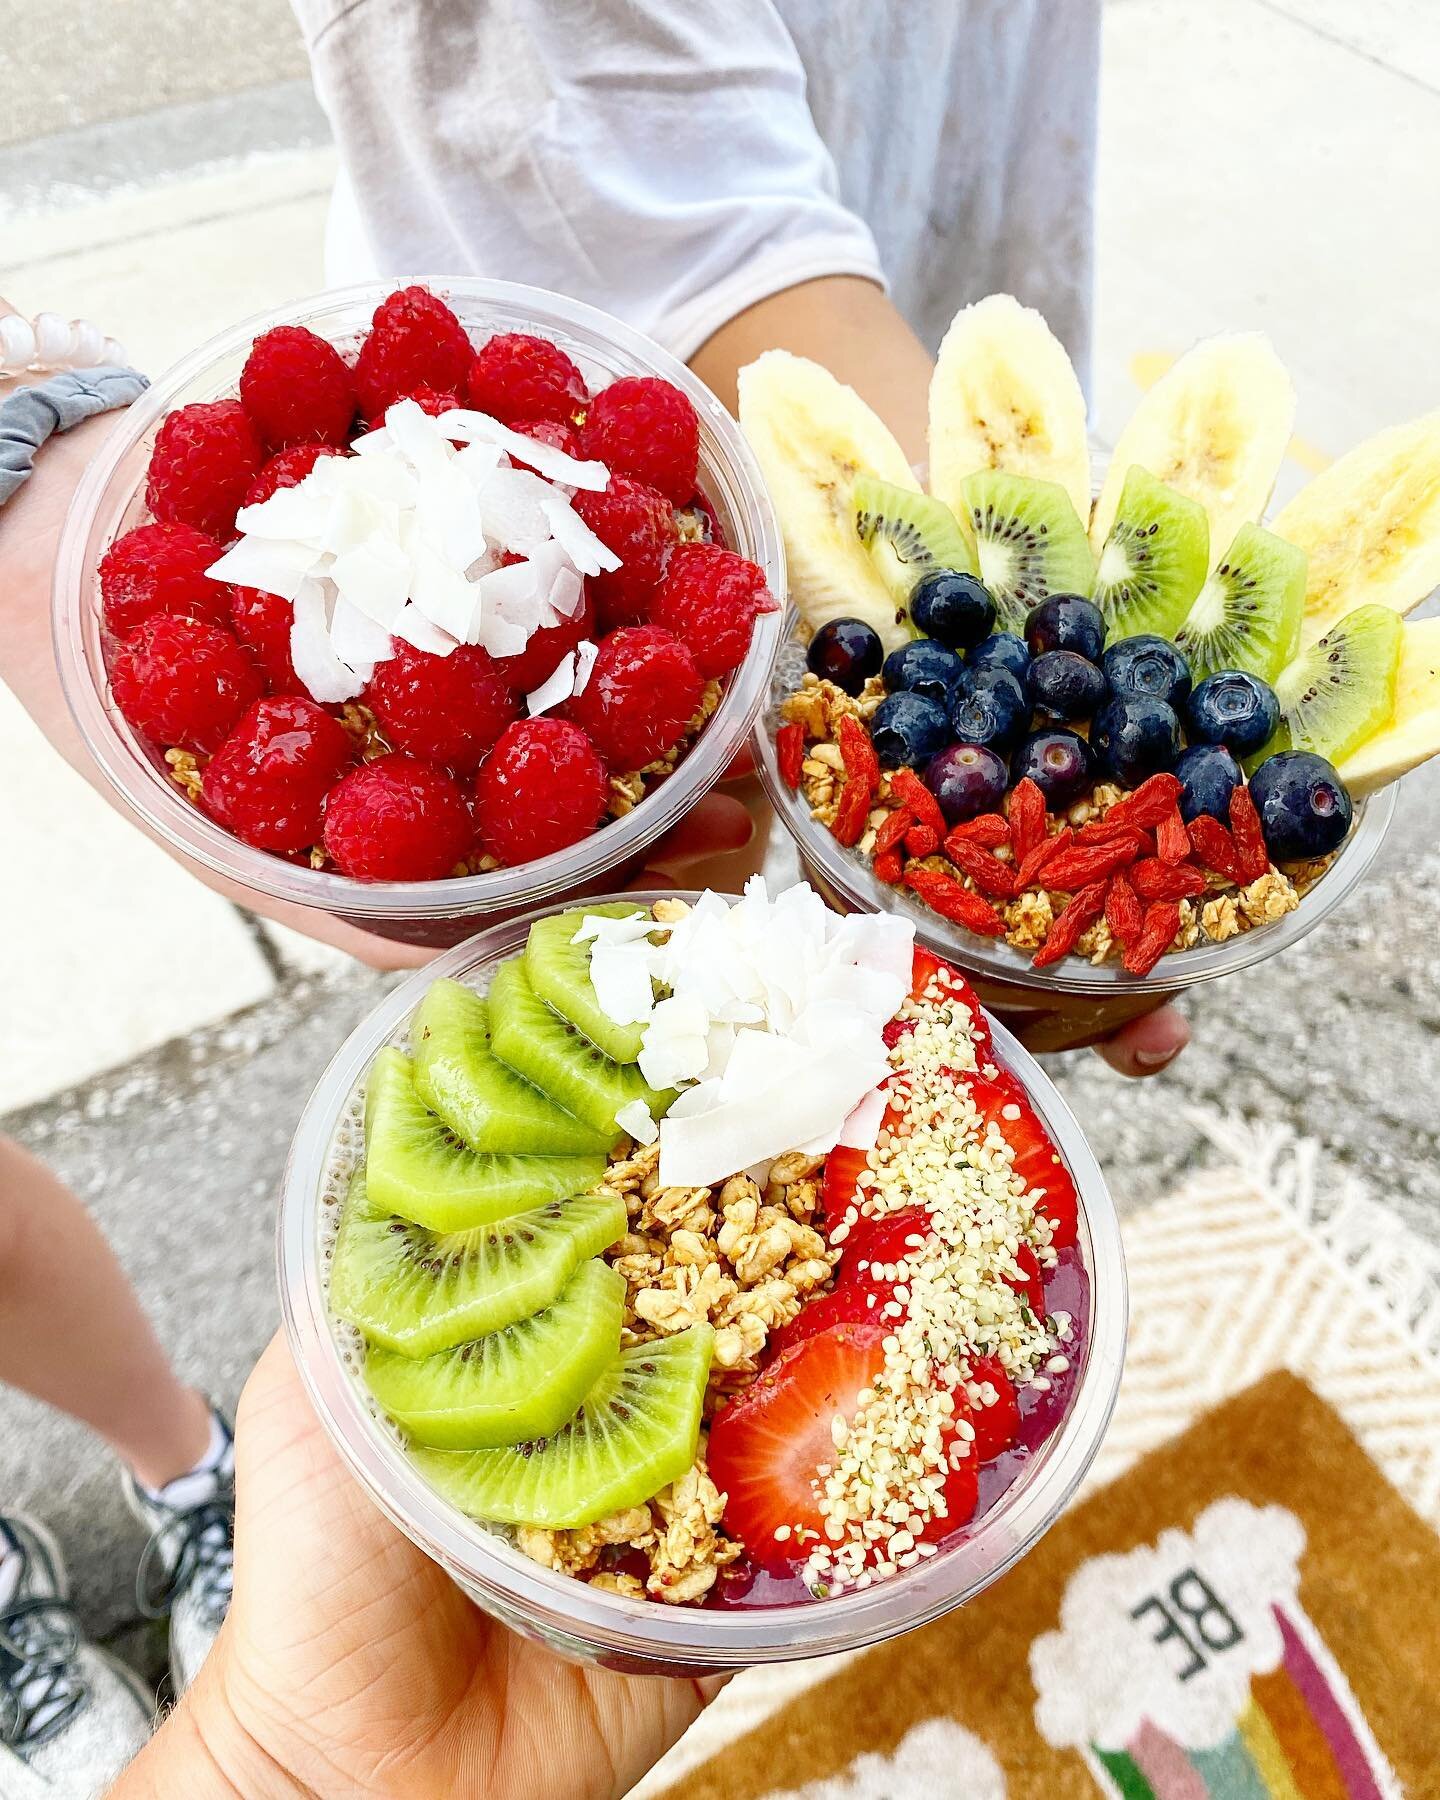 What acai lovers dream about 💭. 🌙 If this is you give us a &ldquo;🙌&rdquo; . 
.
.
 #acaibowl #acaibowls #acai #dailyfoodfeed #lovefood #eatingfortheinsta #smoothie #spoonfeed #smoothiebowl #healthy #foodtruck #foodtrailer #cheatmeal #tastingtable 